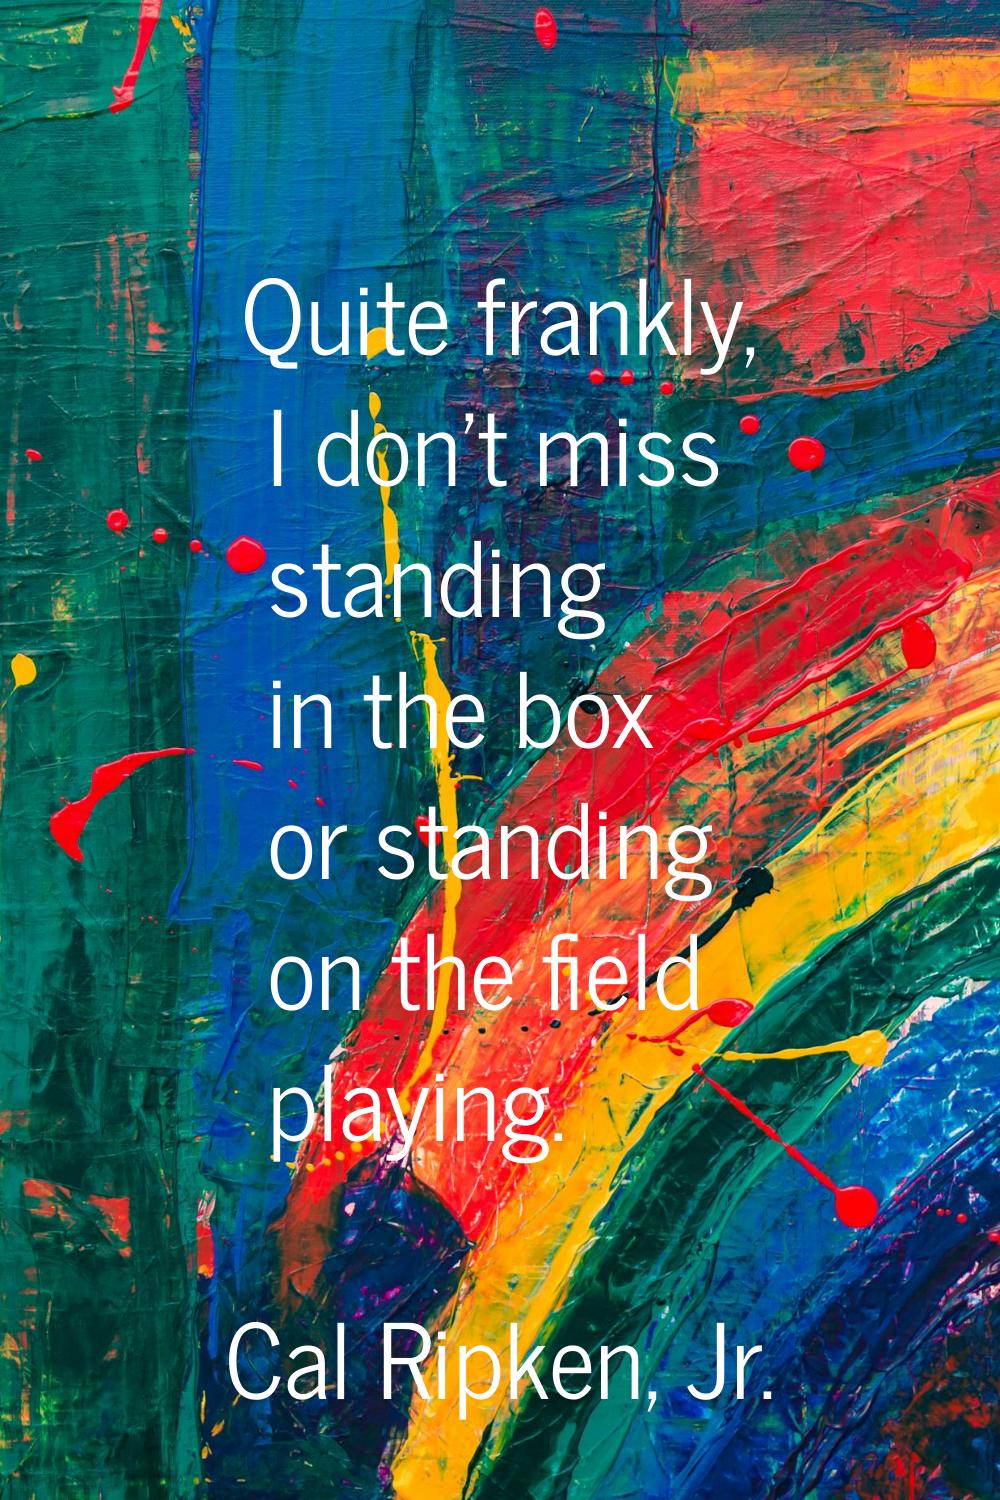 Quite frankly, I don't miss standing in the box or standing on the field playing.